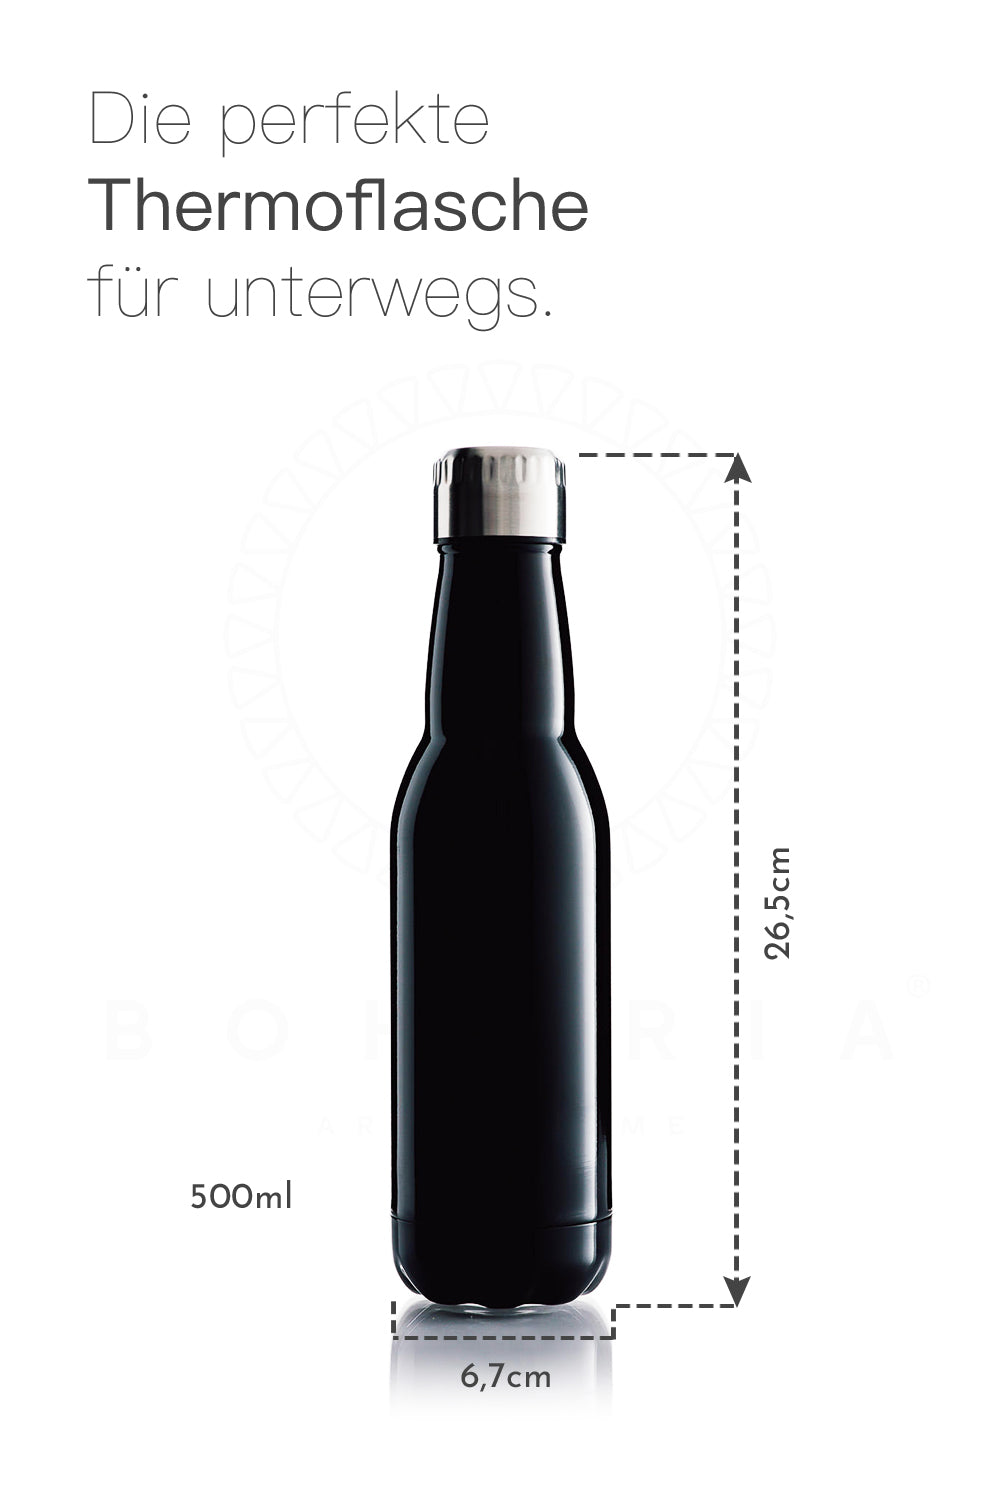 Thermoflasche Black Bottle